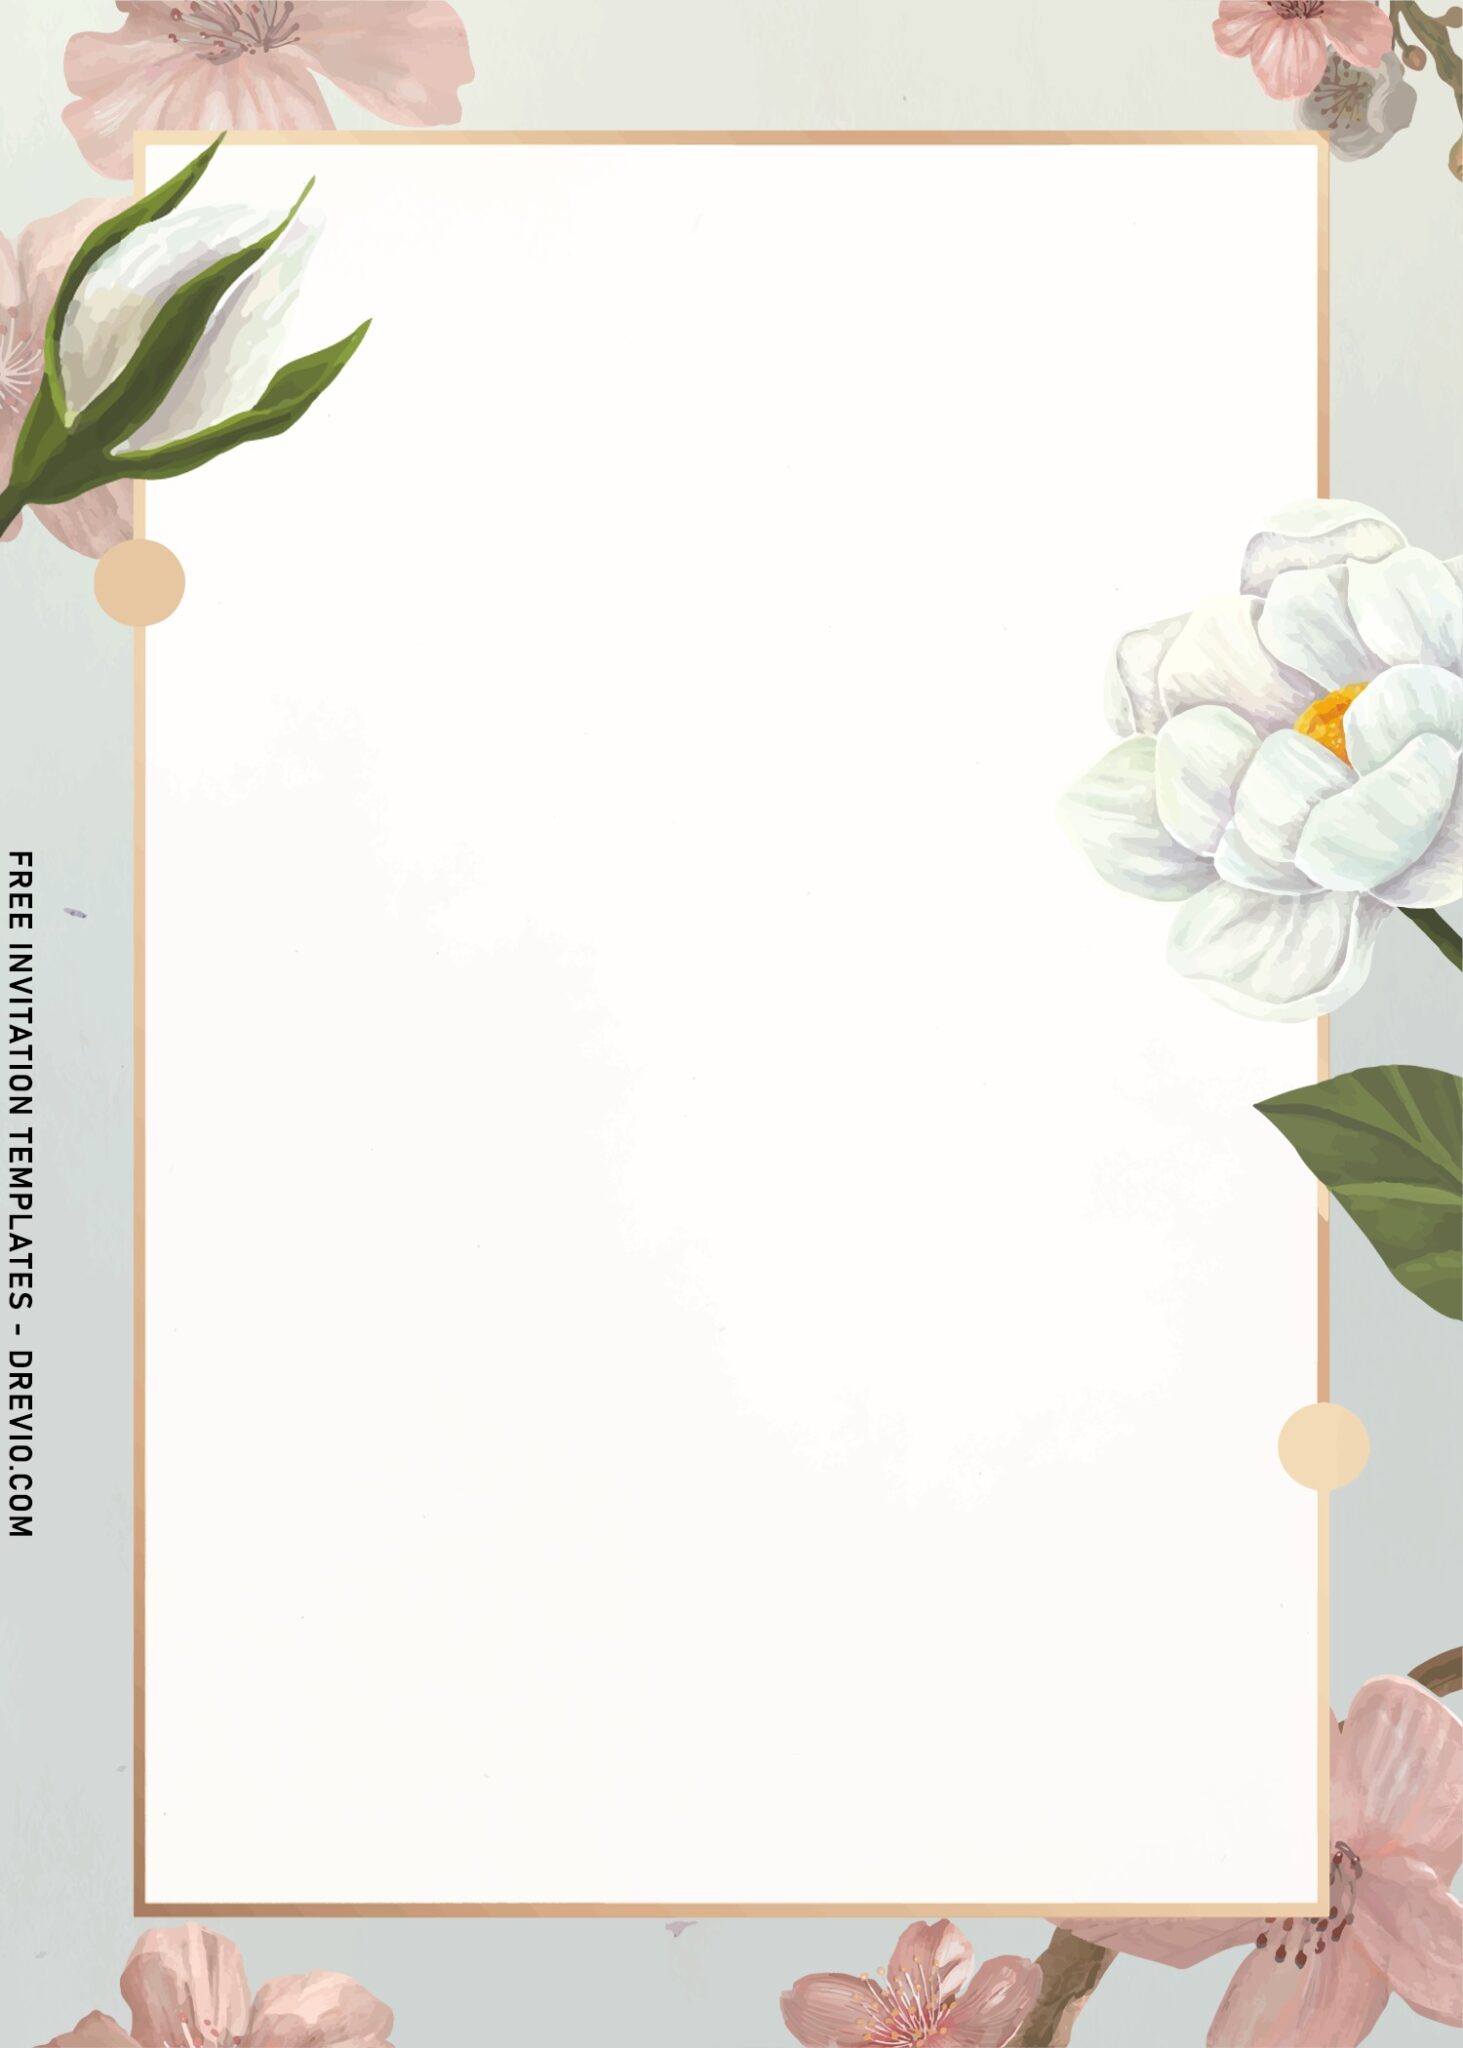 8+ Earthy Cream Anemone And White Carnation Invitation Templates ...